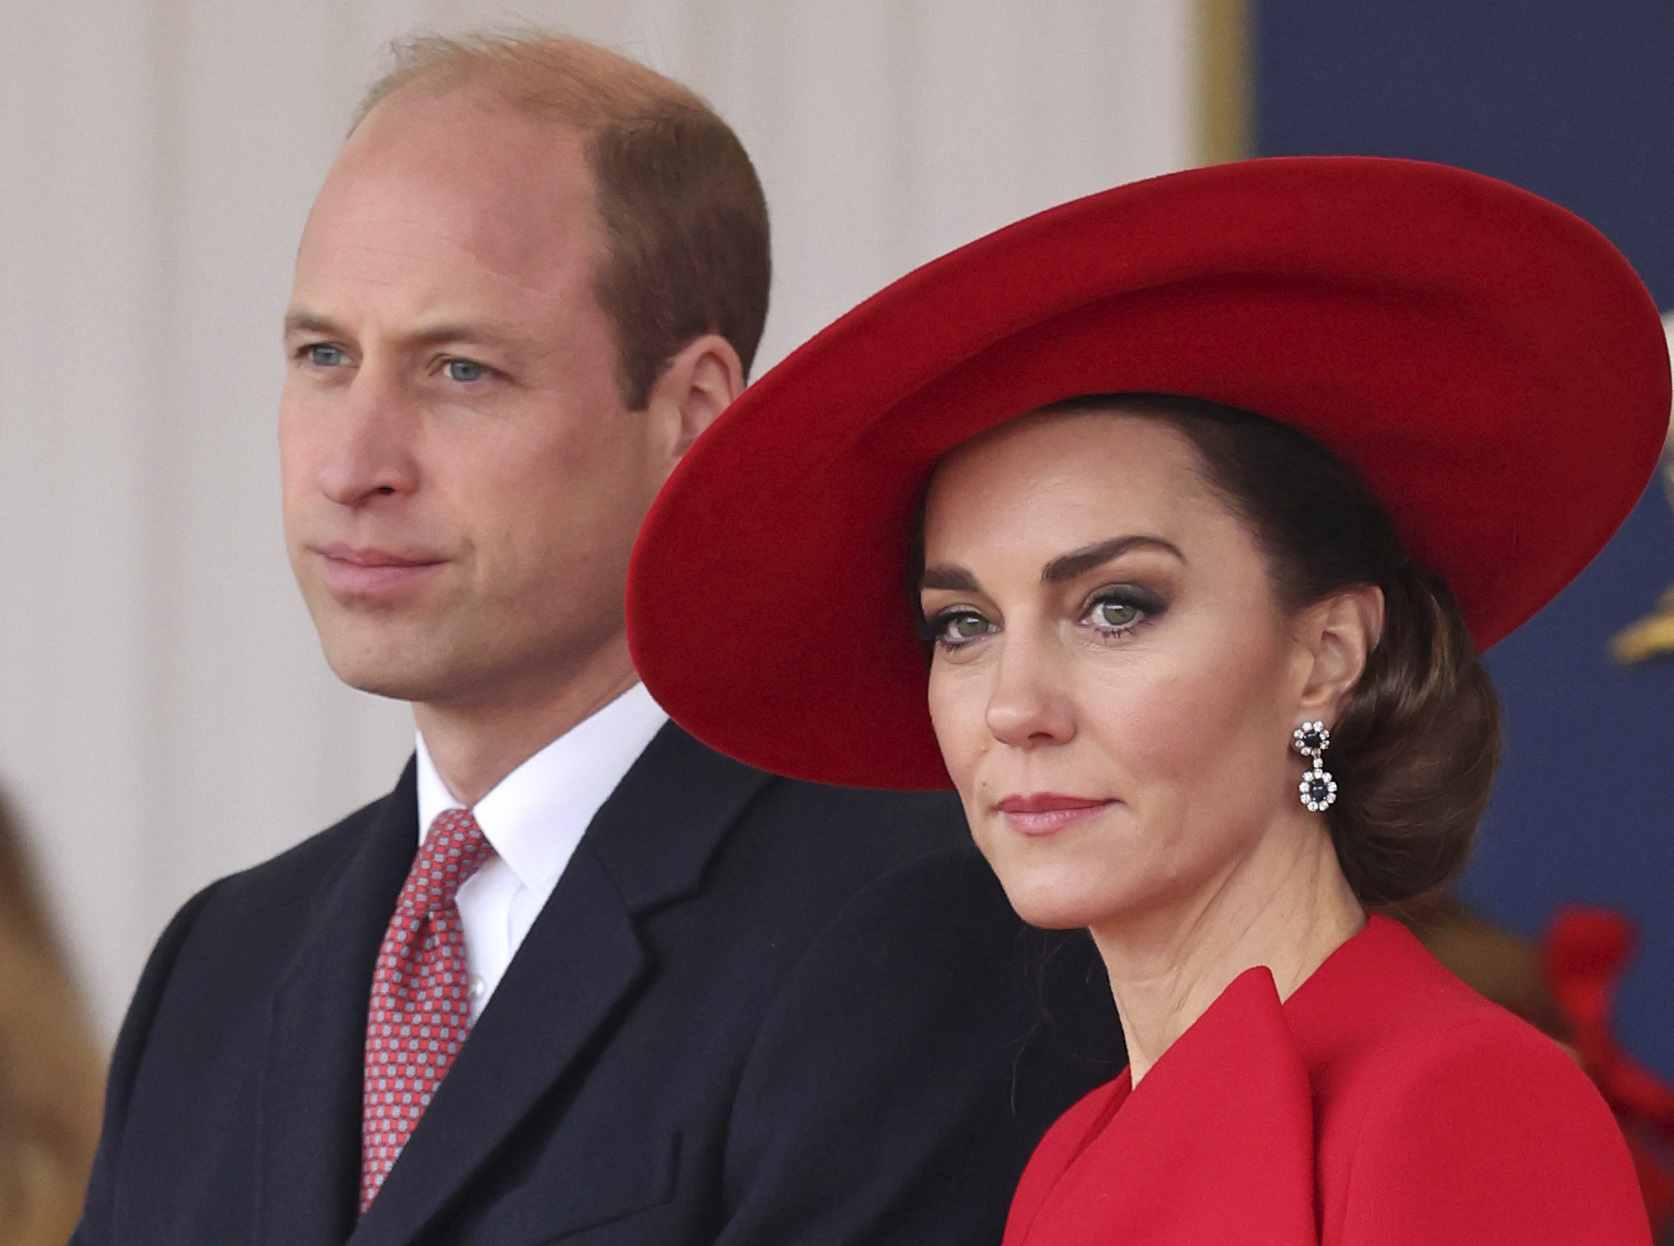 Prince William abruptly pulled out of a memorial service just days after Kate's surgery, where he was supposed to do a reading, which fueled even more rumors